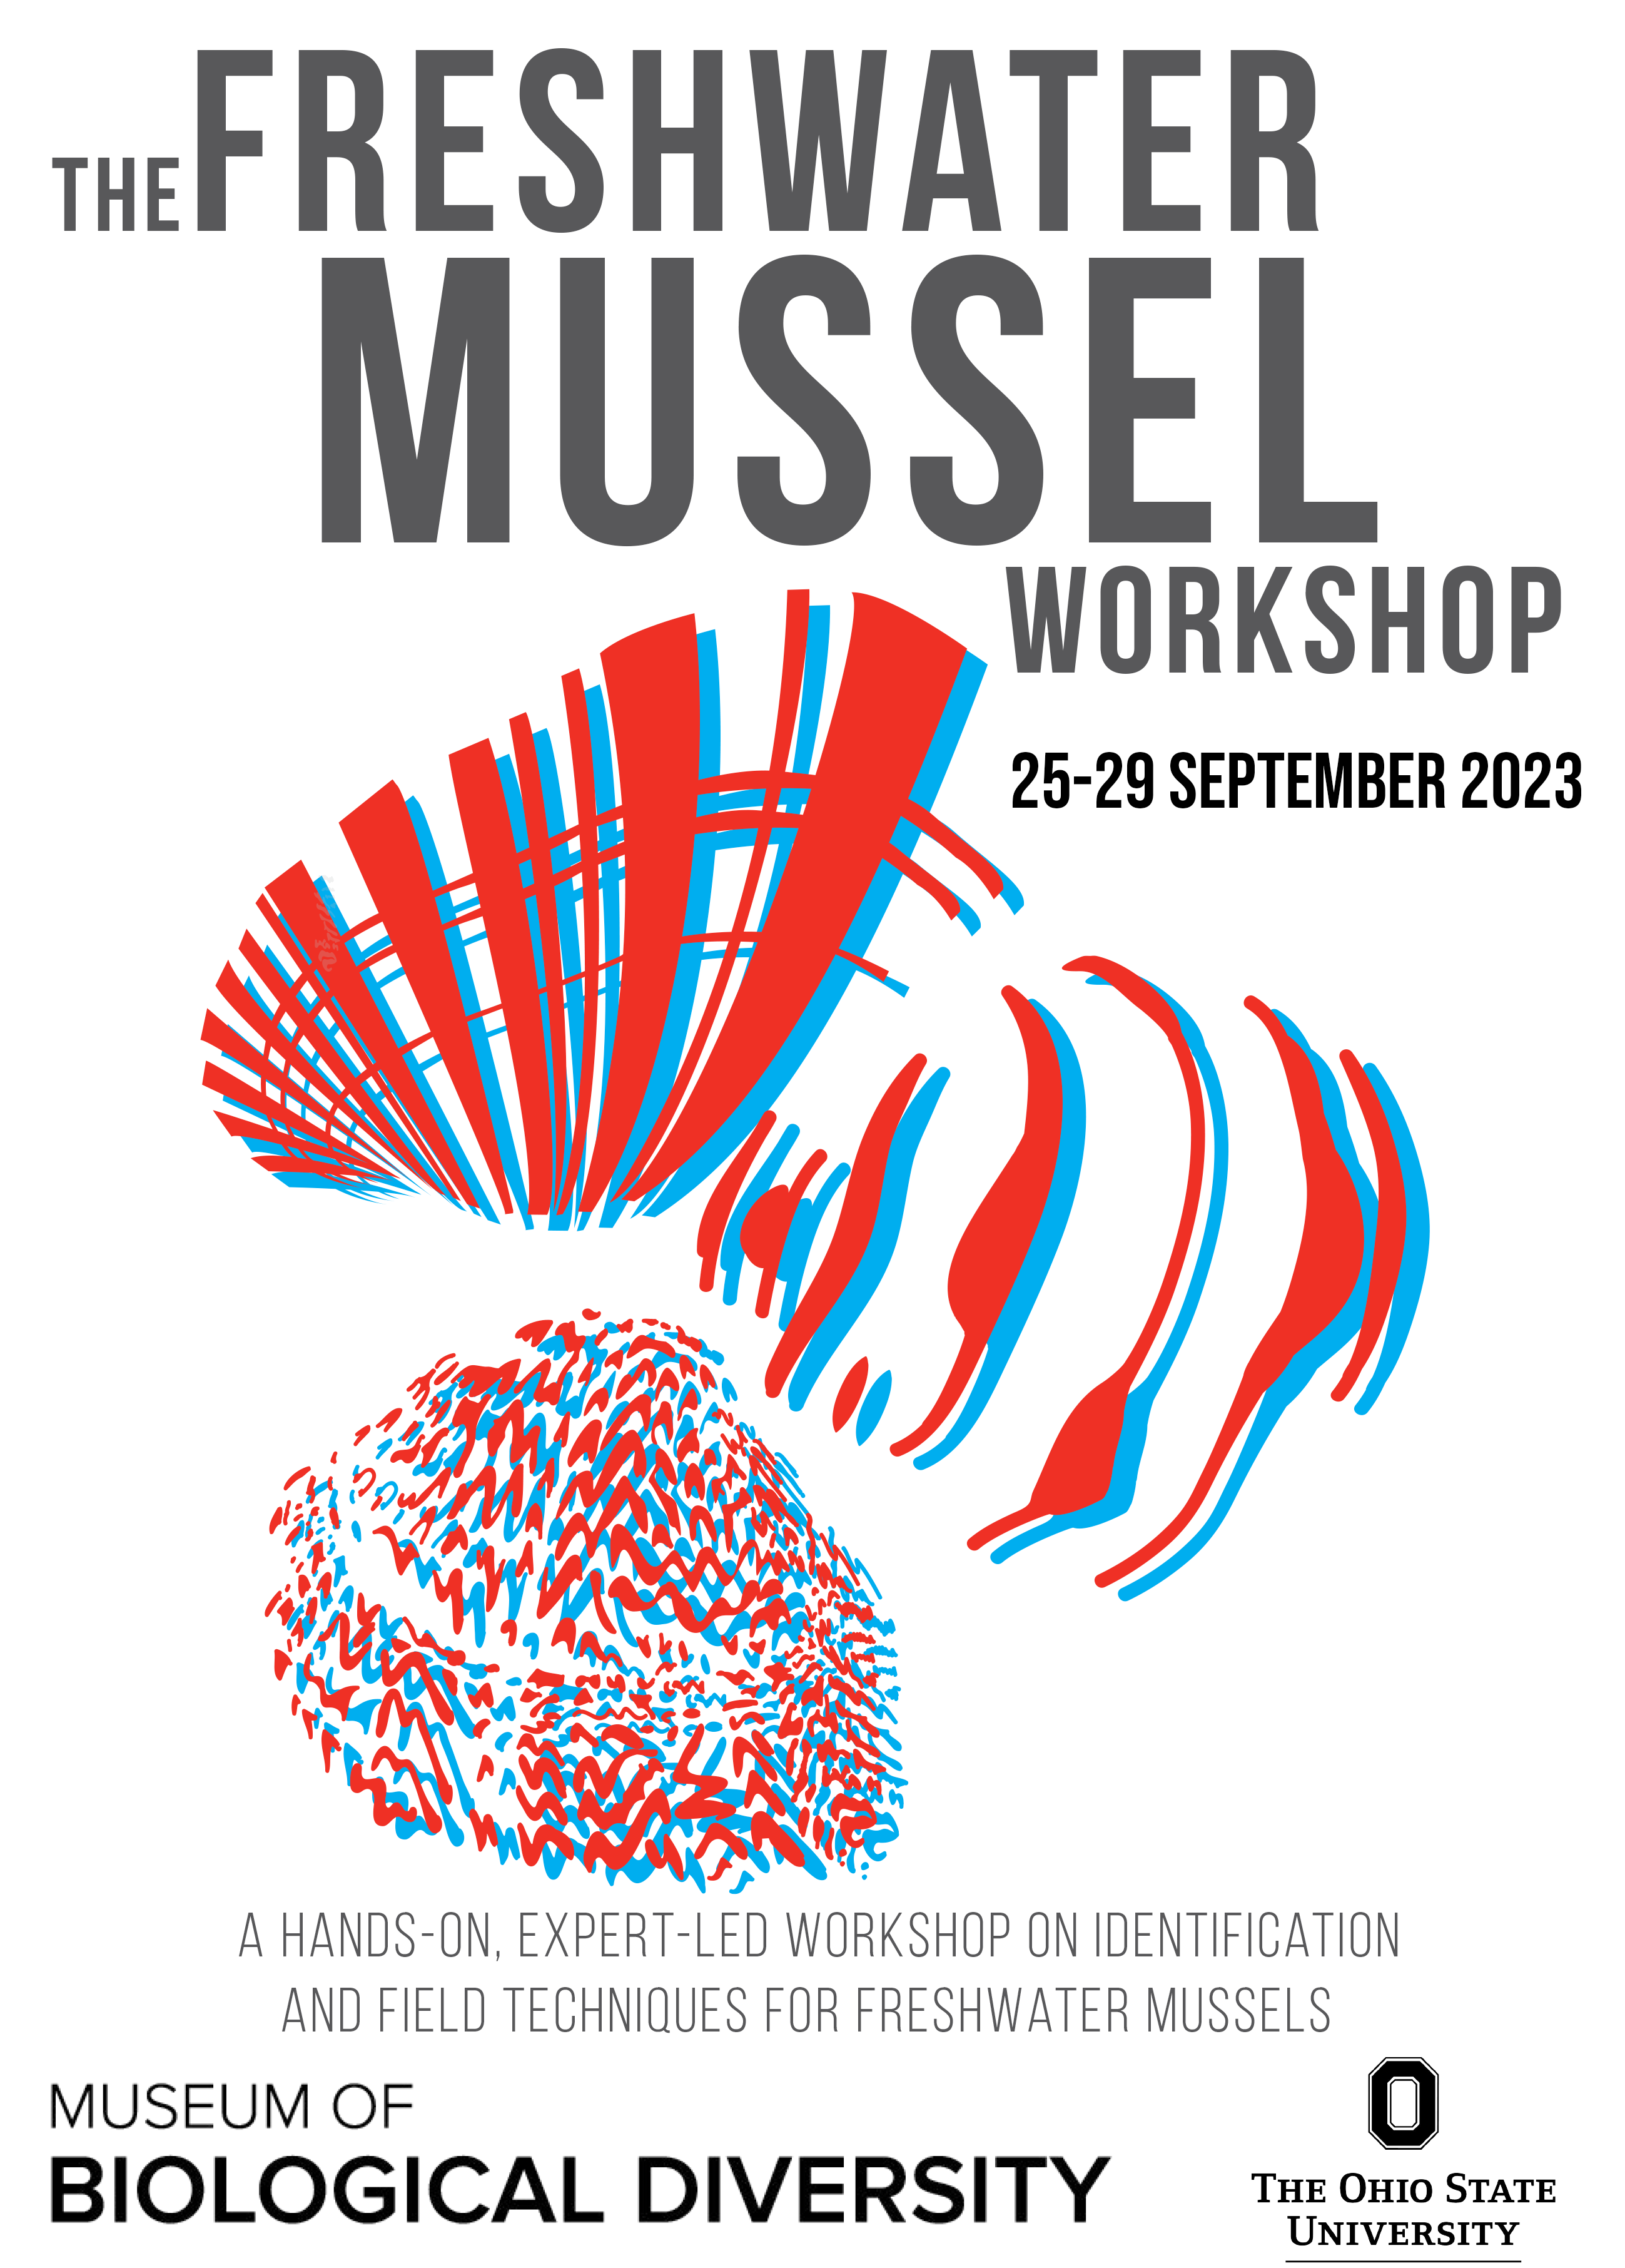 flyer for the freshwater mussel workshop showing colorful mussel shells and date and location of workshop